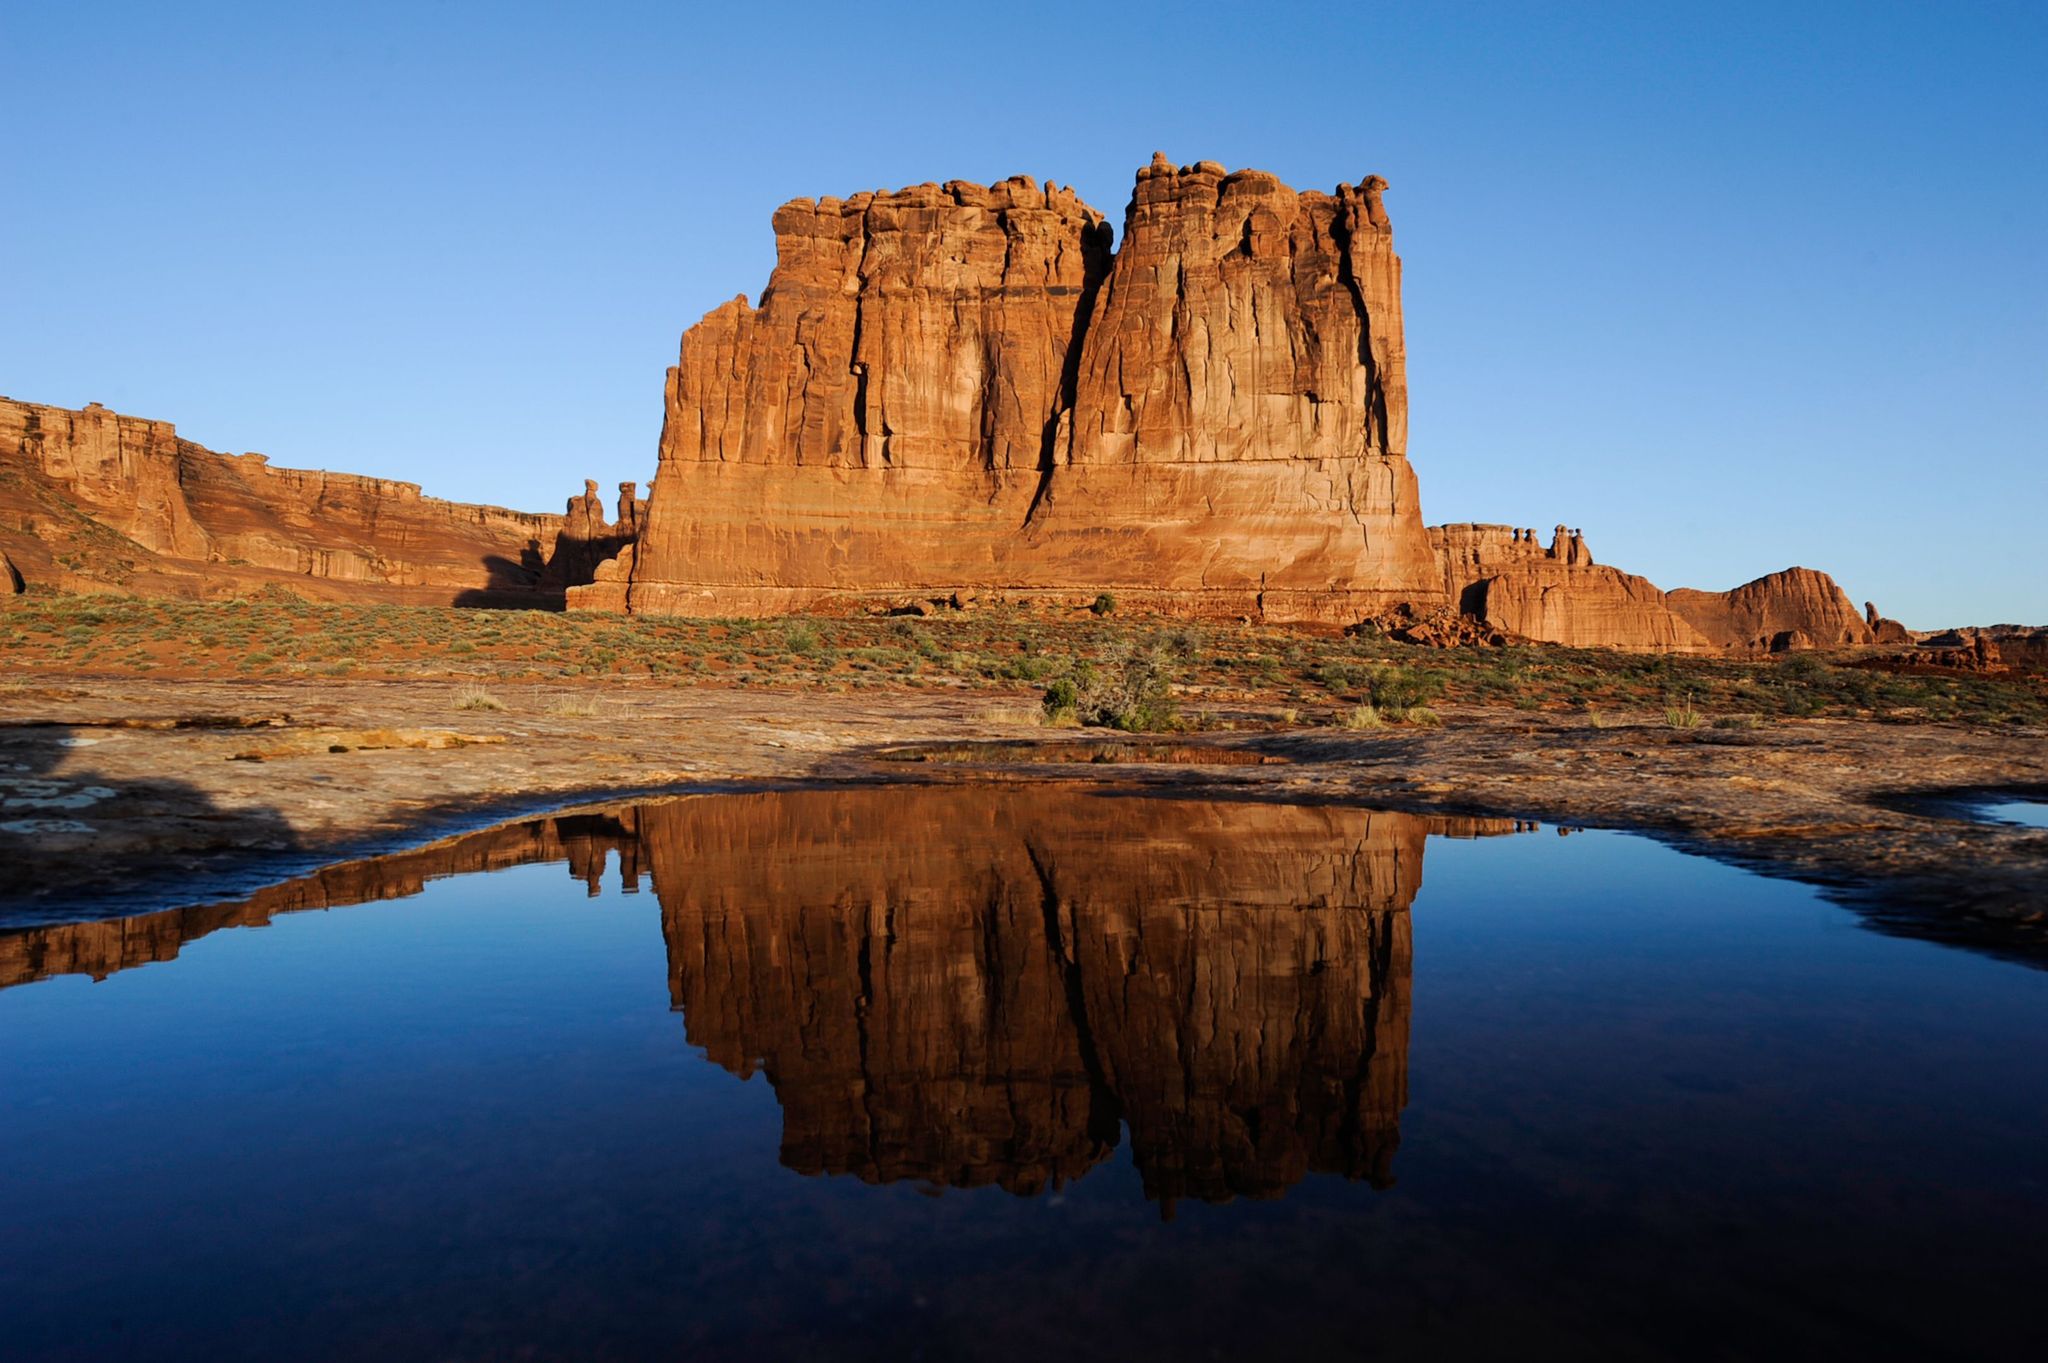 The Organ rock formation is reflected in one of many natural potholes.